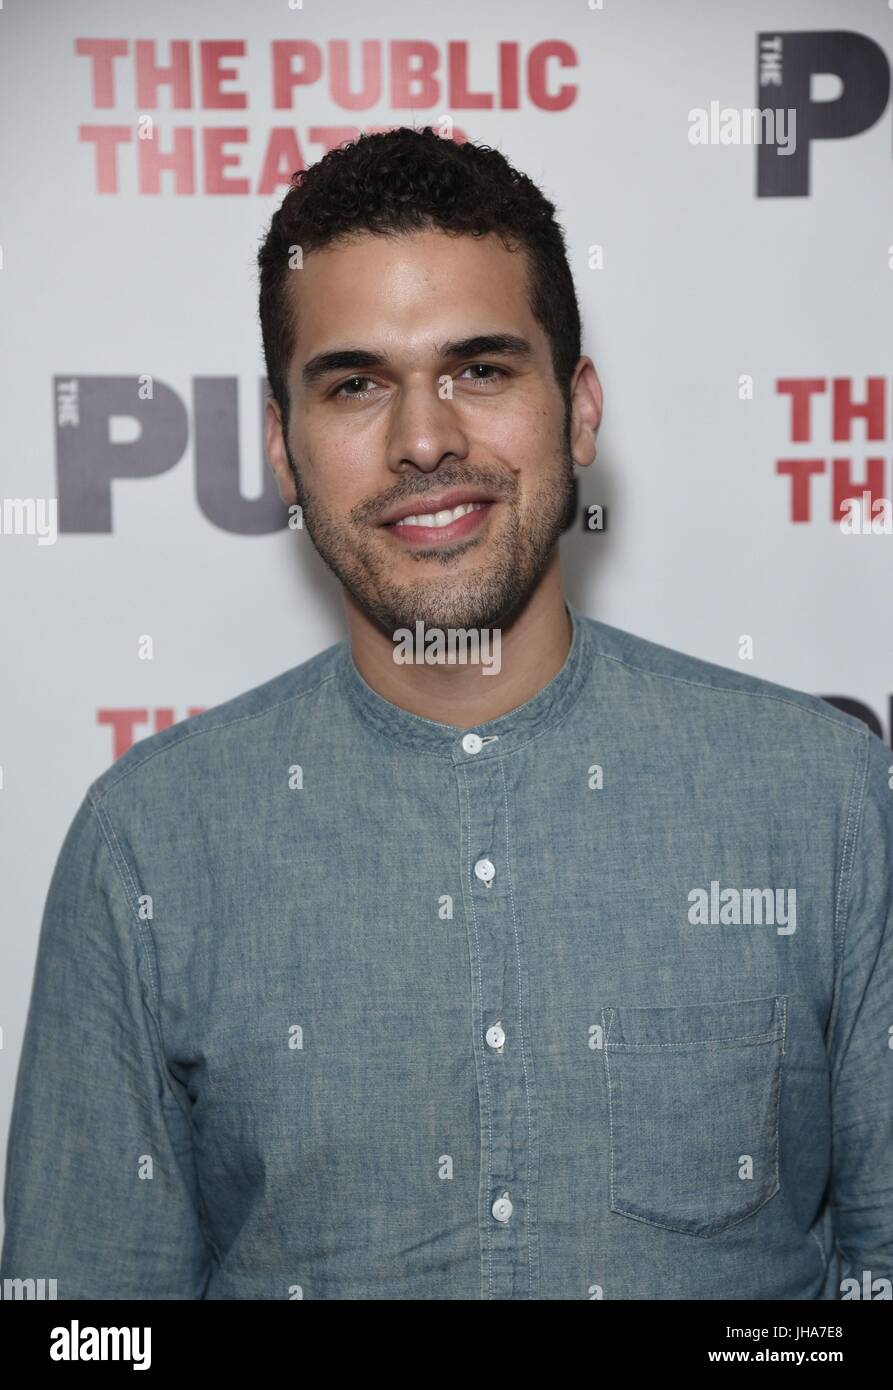 New York, NY, USA. 13th July, 2017. Joel Perez at arrivals for HAMLET Opening Night Celebration Presented by The Public Theater, The Public Theater, New York, NY July 13, 2017. Credit: Derek Storm/Everett Collection/Alamy Live News Stock Photo